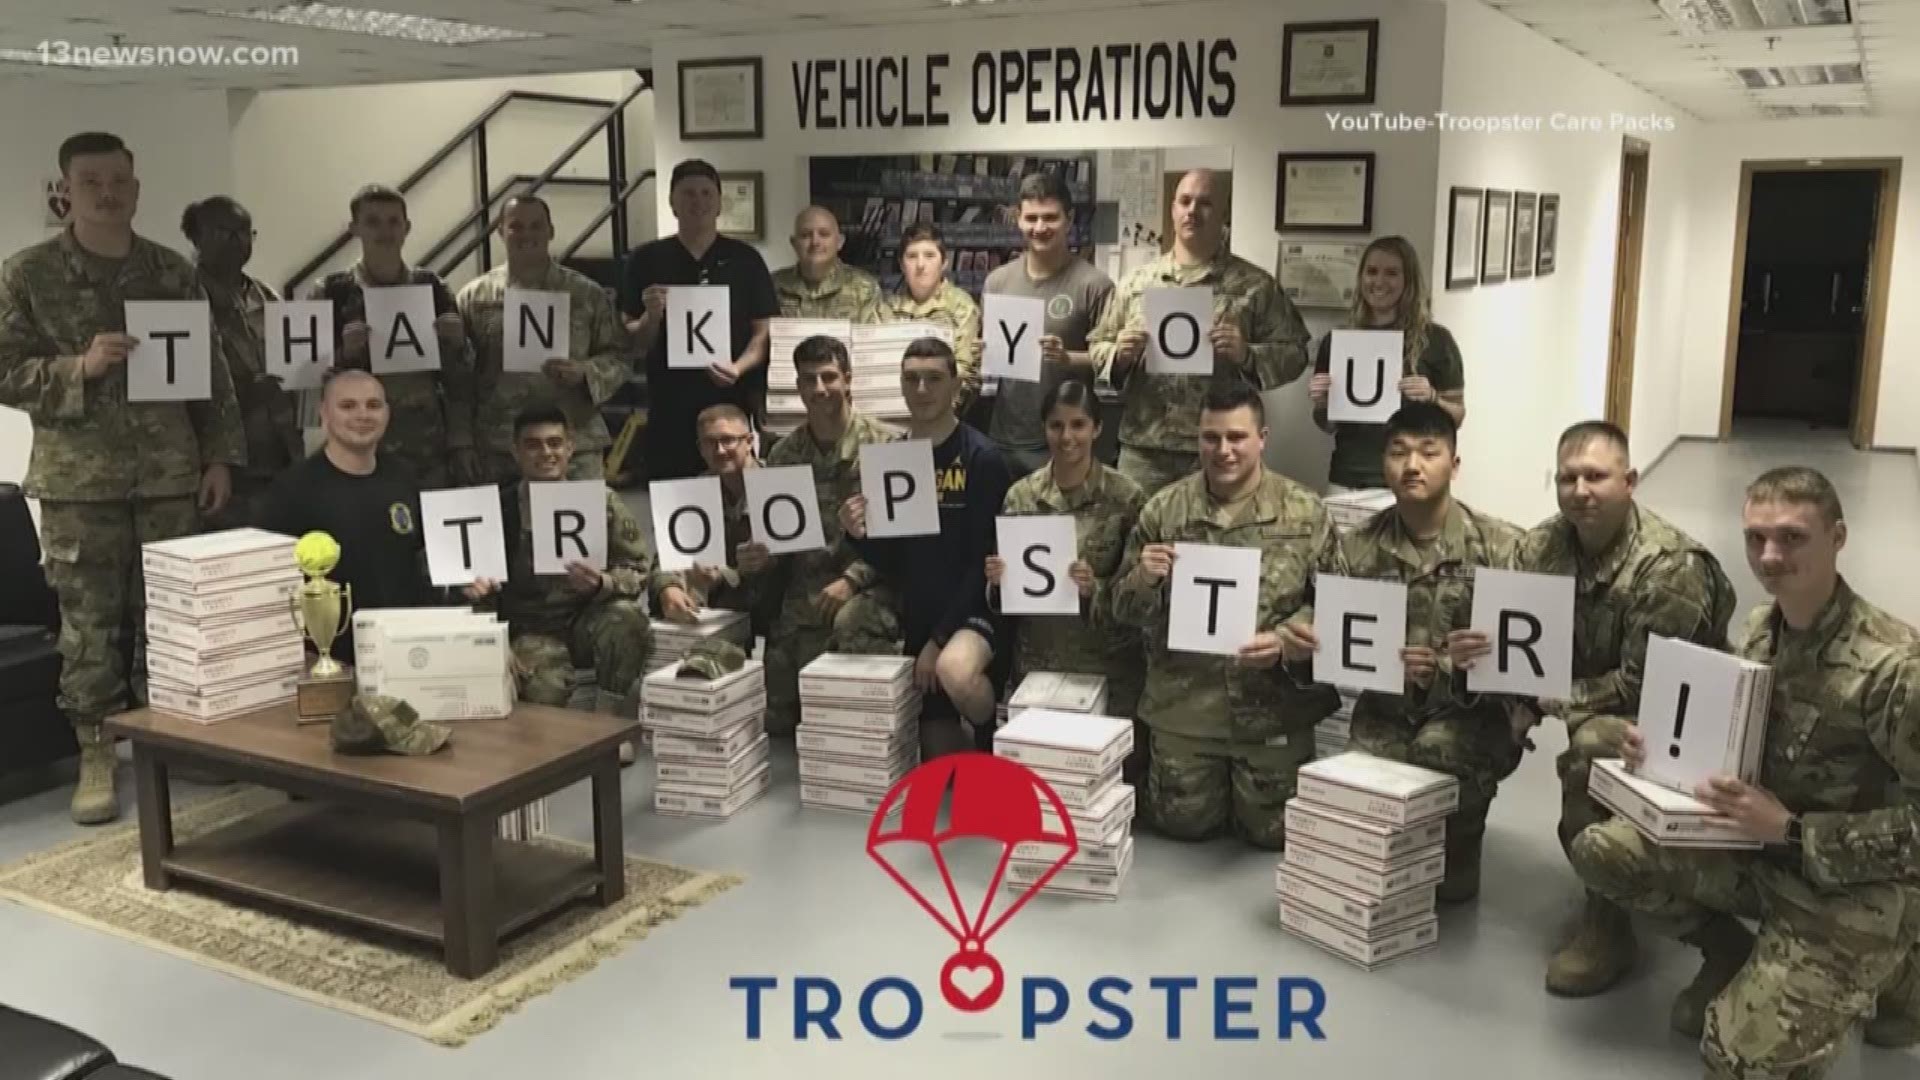 The Norfolk nonprofit usually sends care packages to military personnel deployed overseas. They hope to use their facilities to send packages to medical workers.